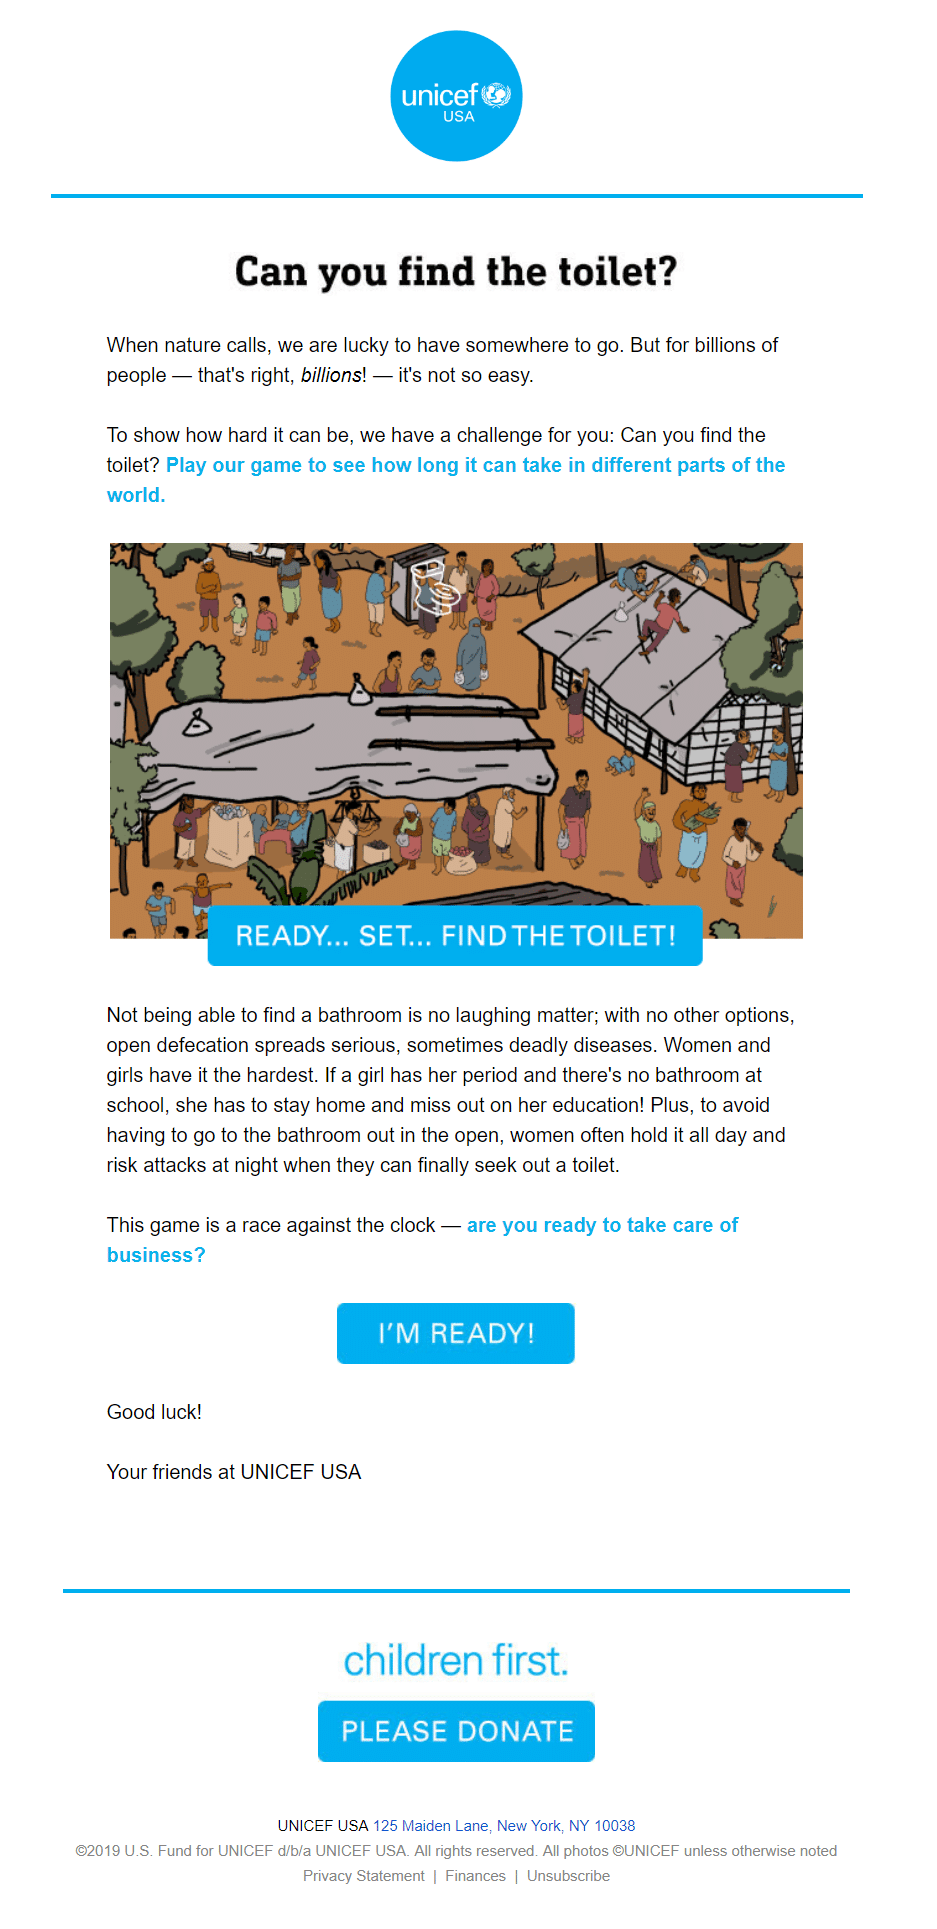 UNICEF recently revamped their email design and content to include some gamified campaigns. 